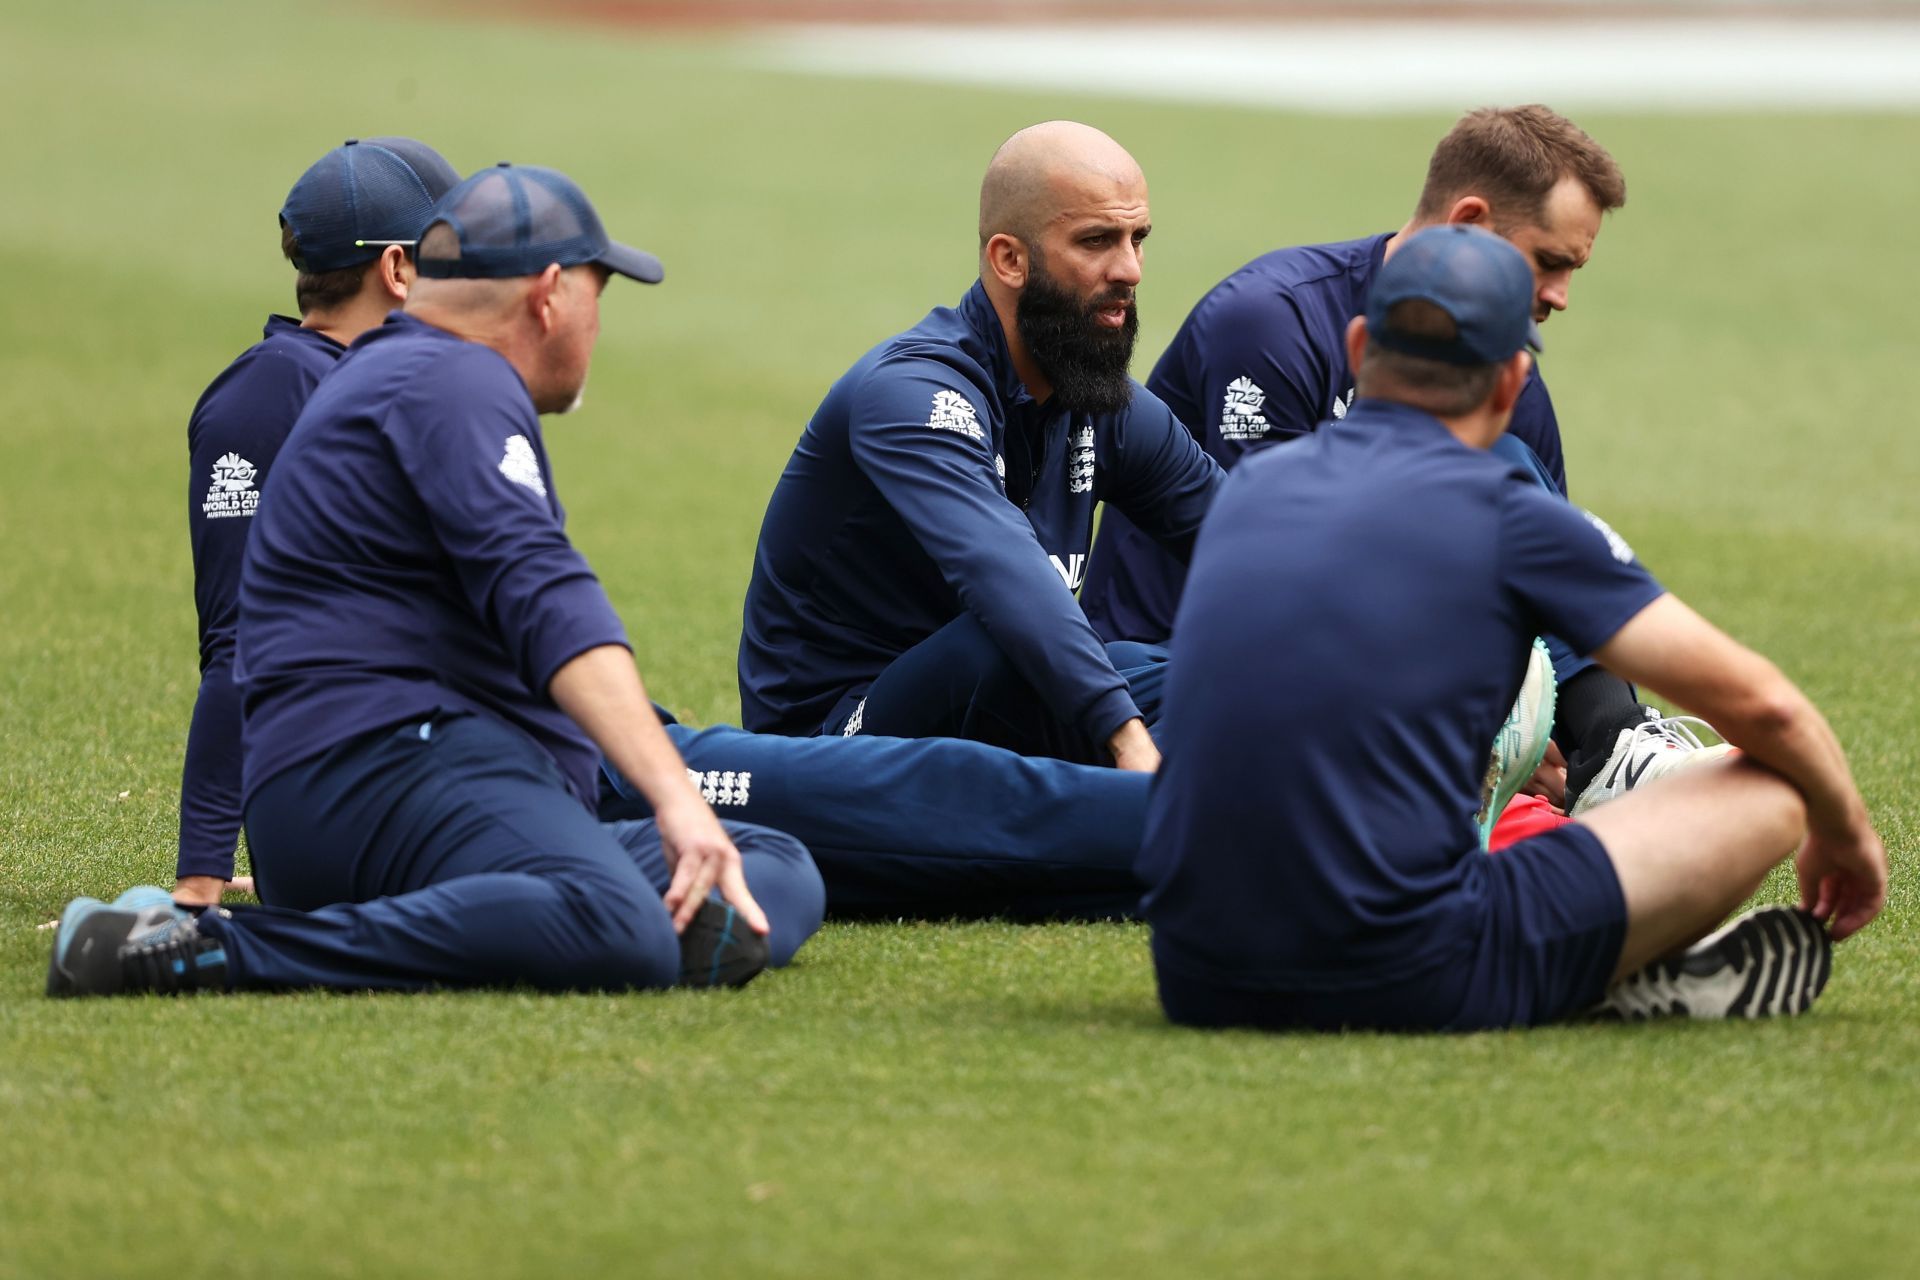 England ICC T20 World Cup Team Training Session